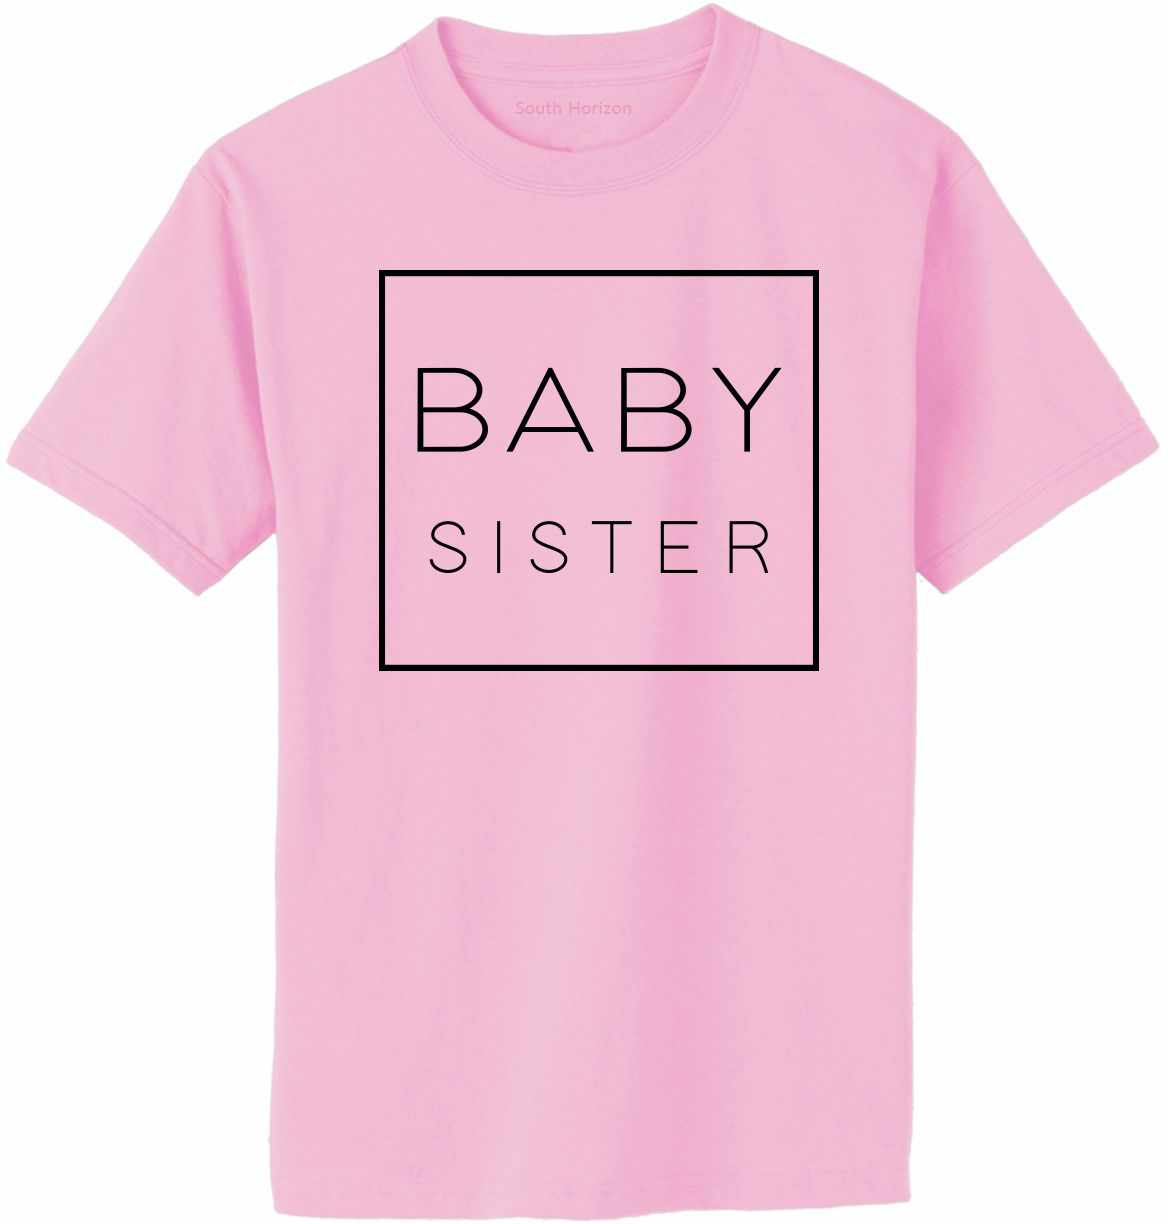 Baby Sister - Box on Adult T-Shirt